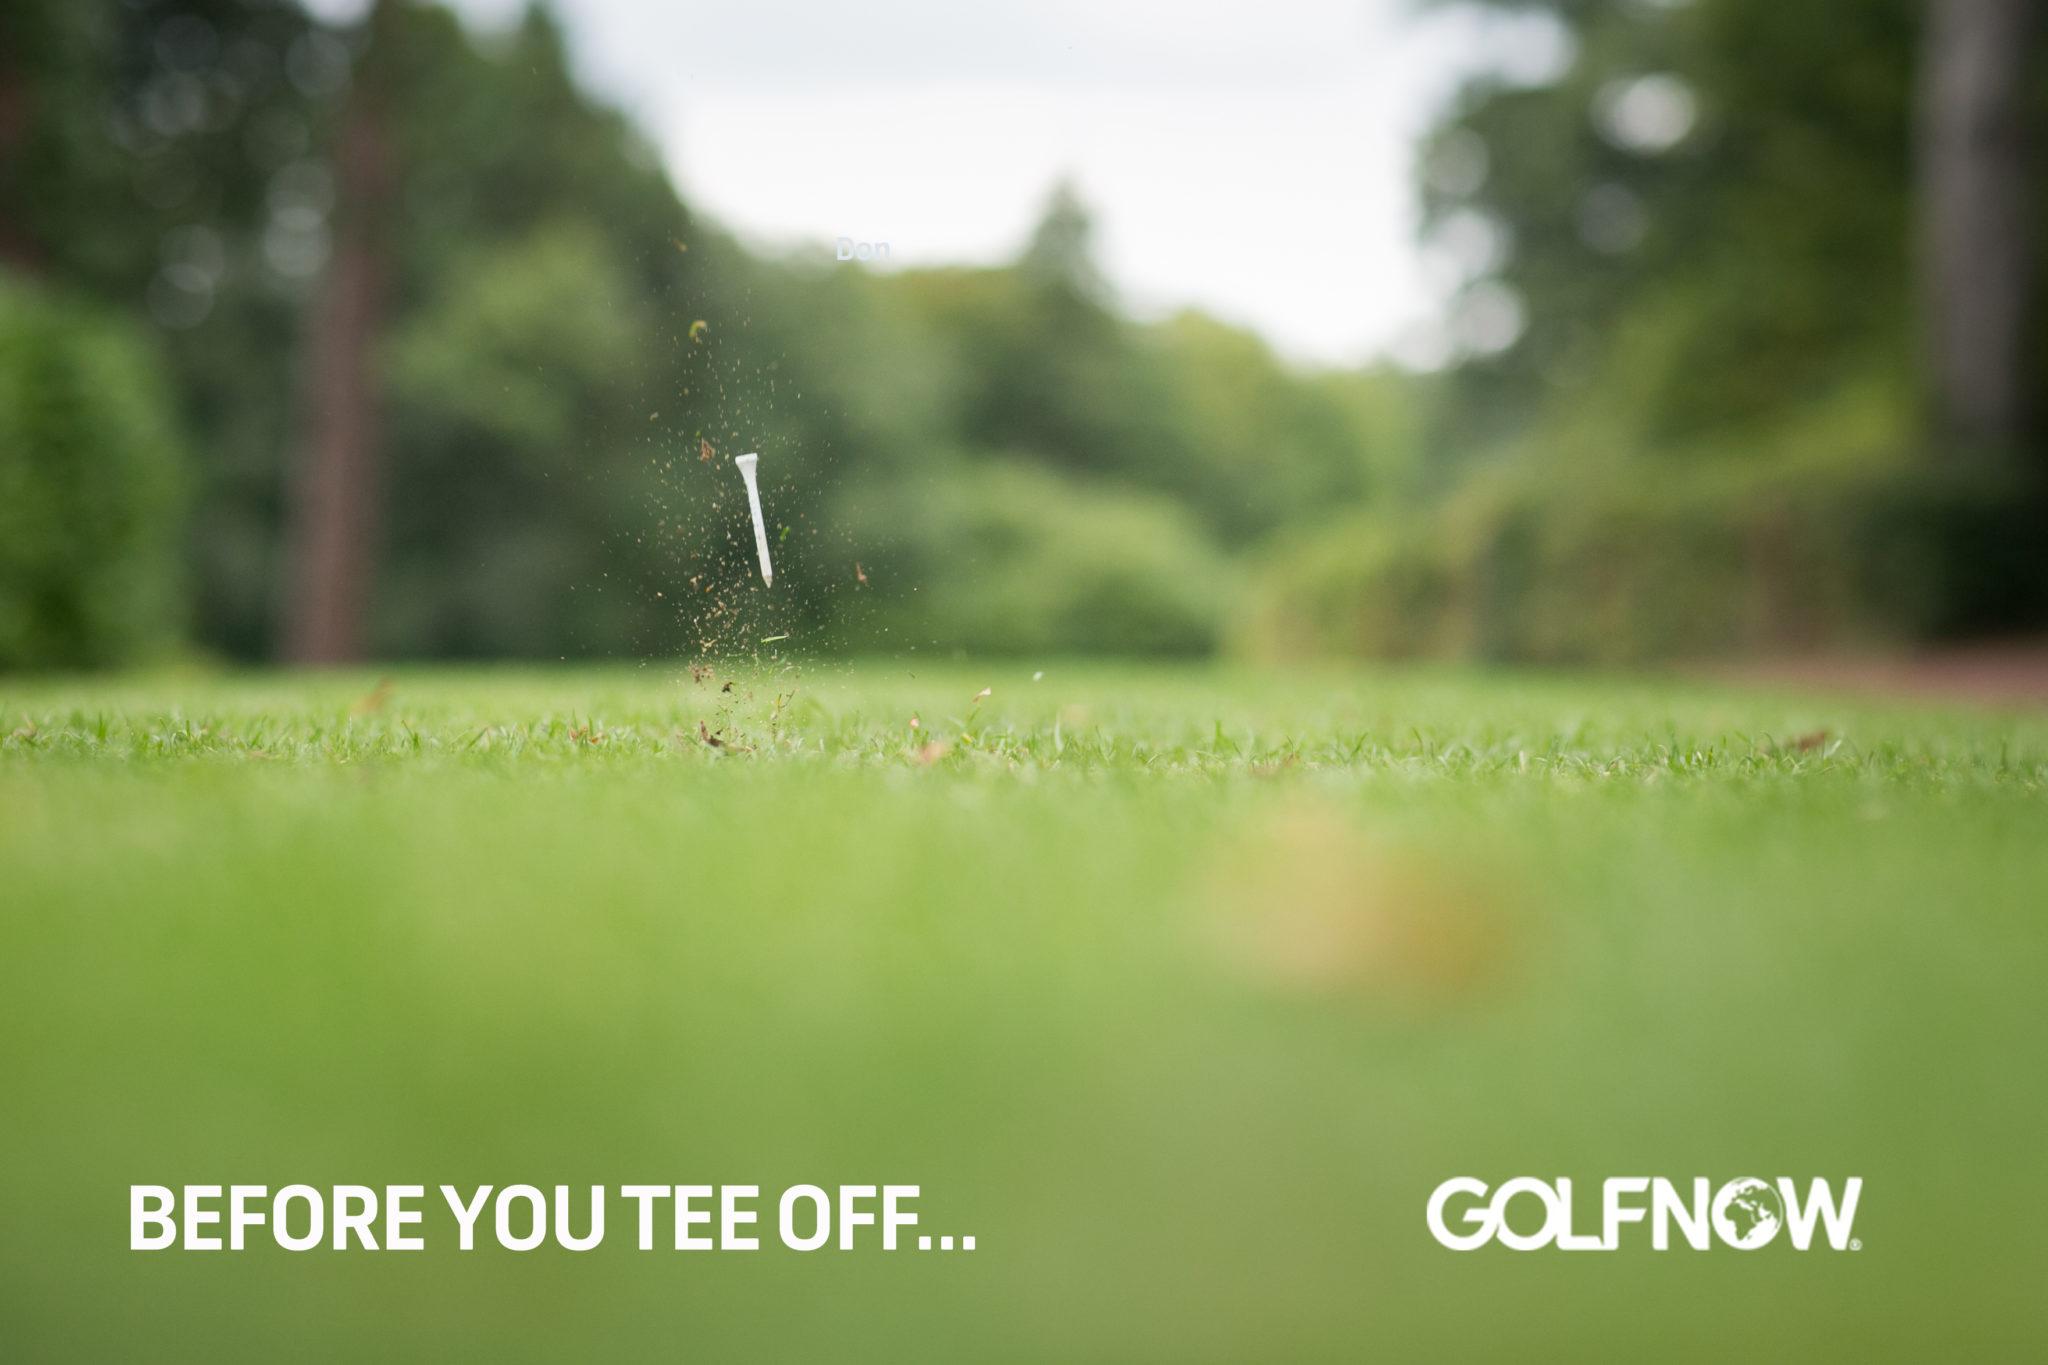 Before you tee off read our dos and don'ts